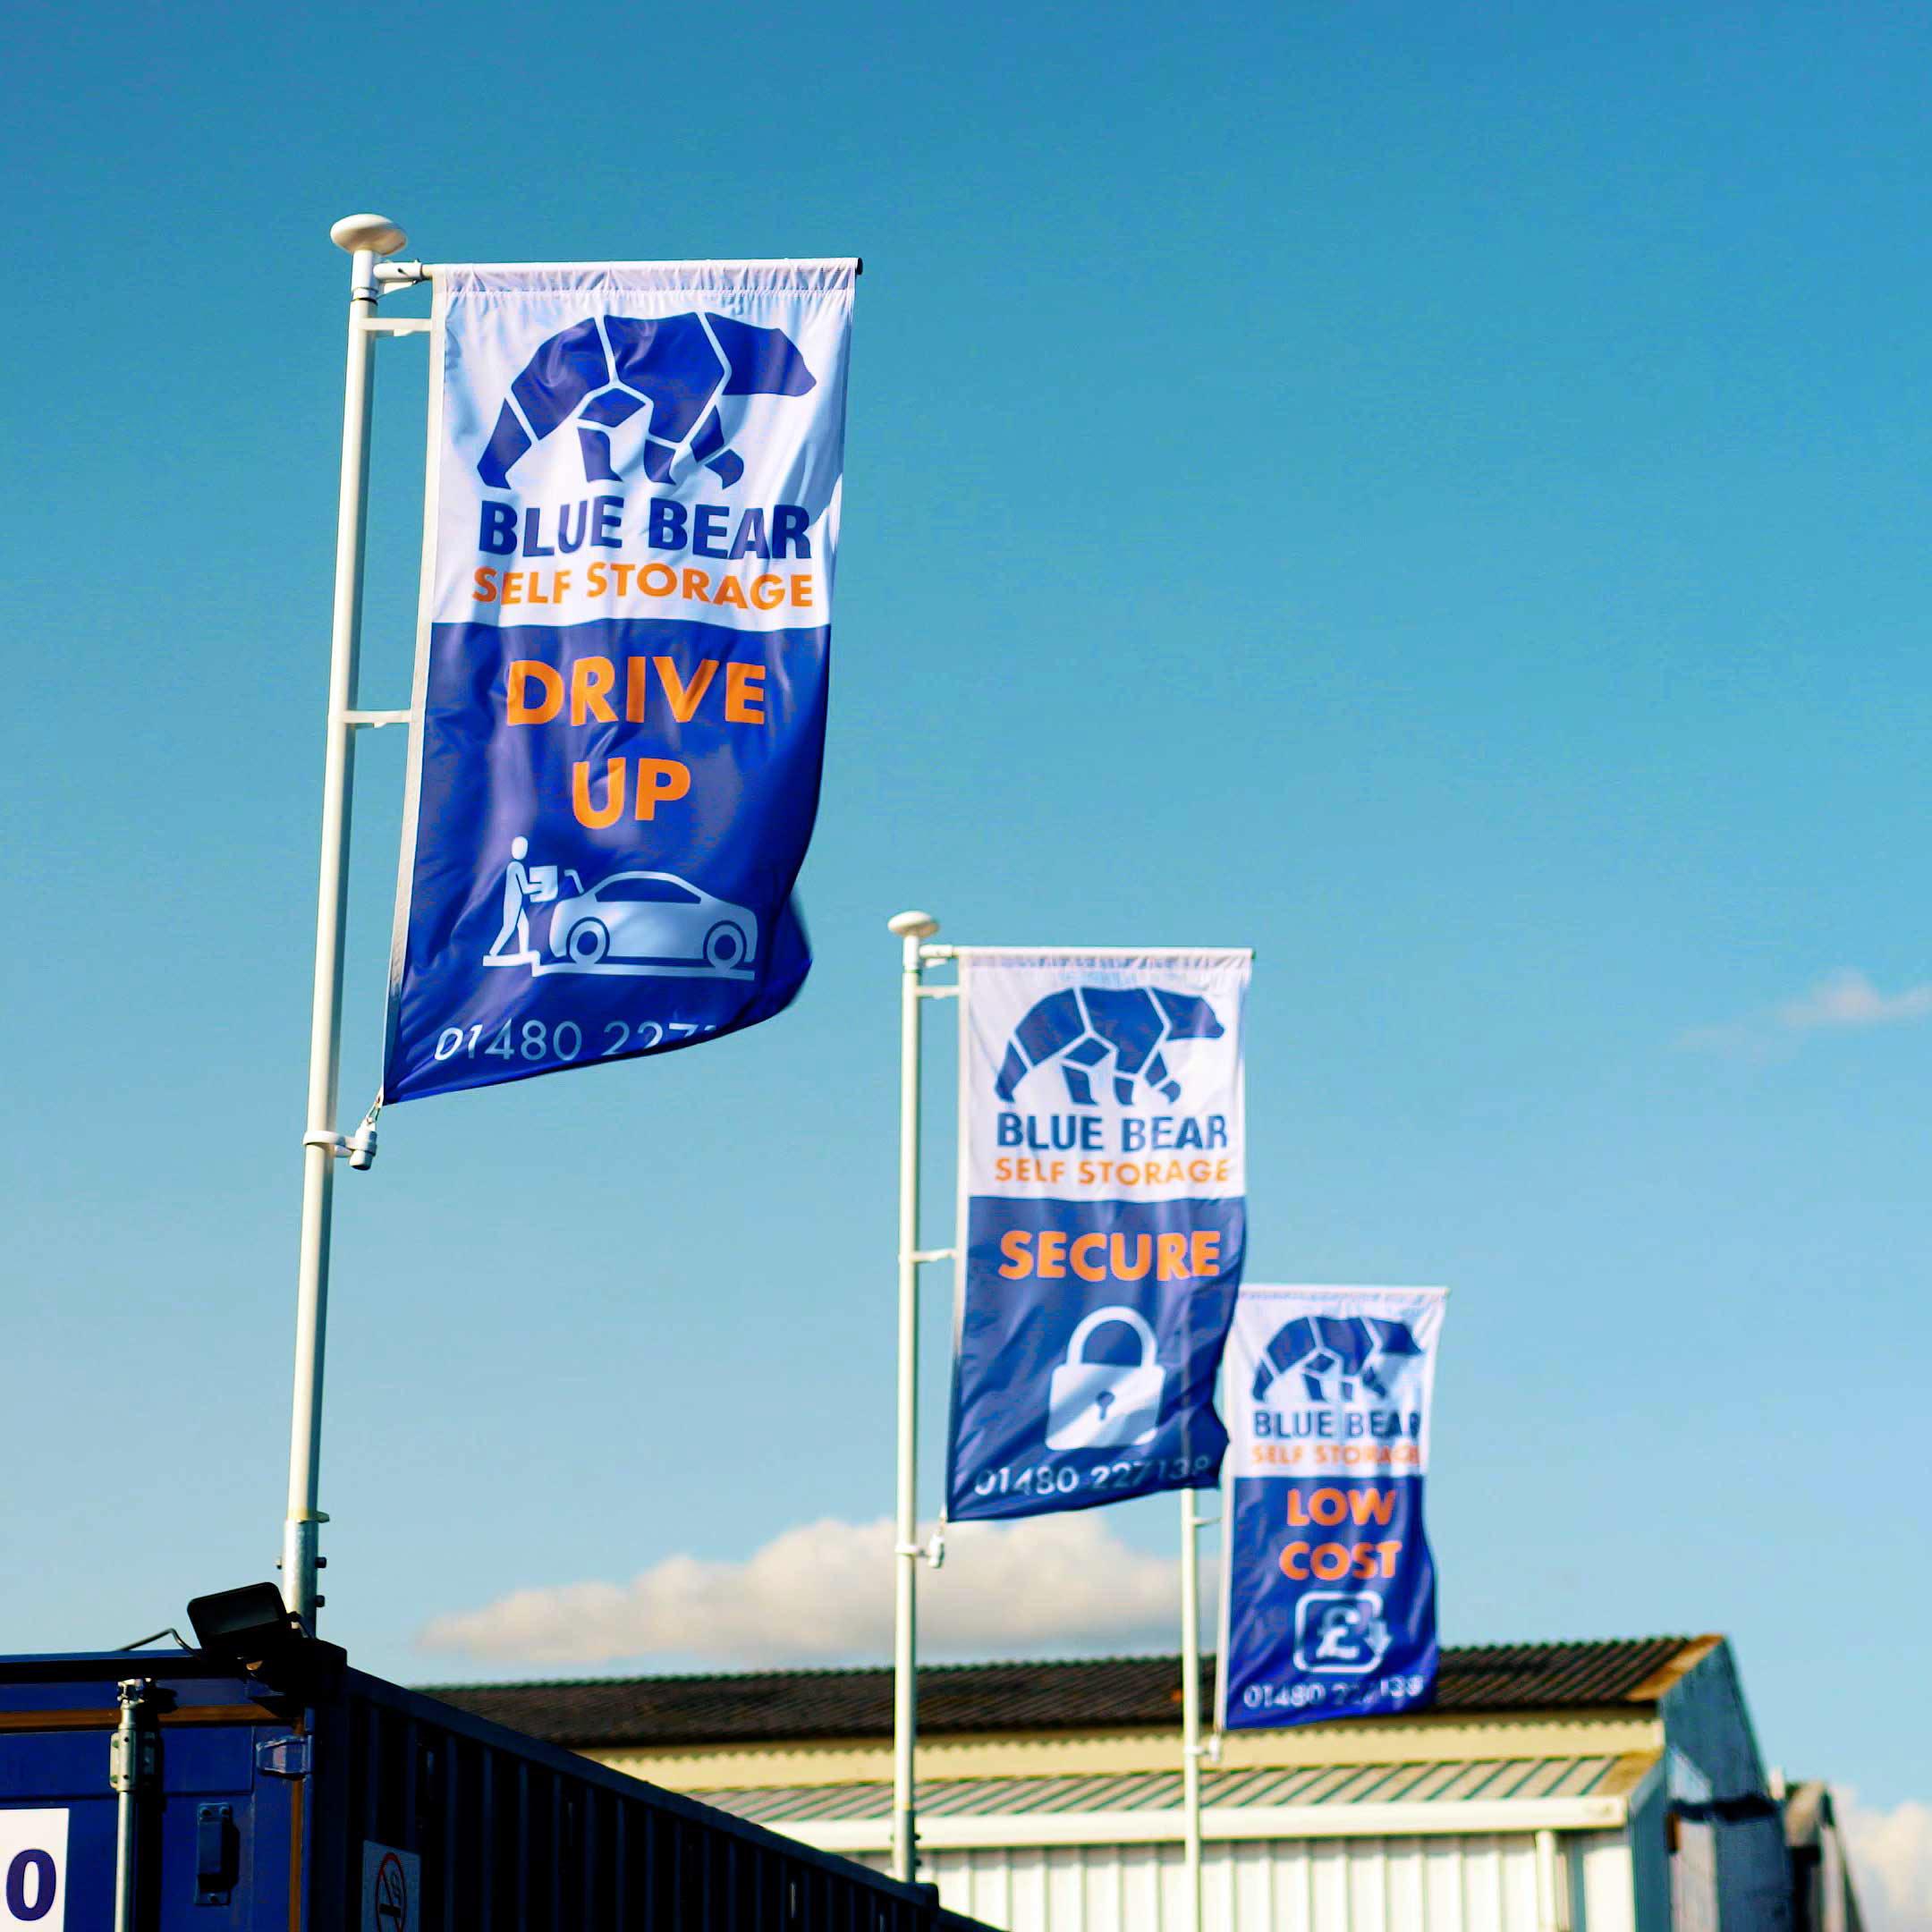 Put your trust in Blue Bear Storage St Ives for off-site document storage.  We have safety measures, compliance, flexible storage space, easy drive-up access competitive pricing and 5-star Google and Trust Pilot reviews.